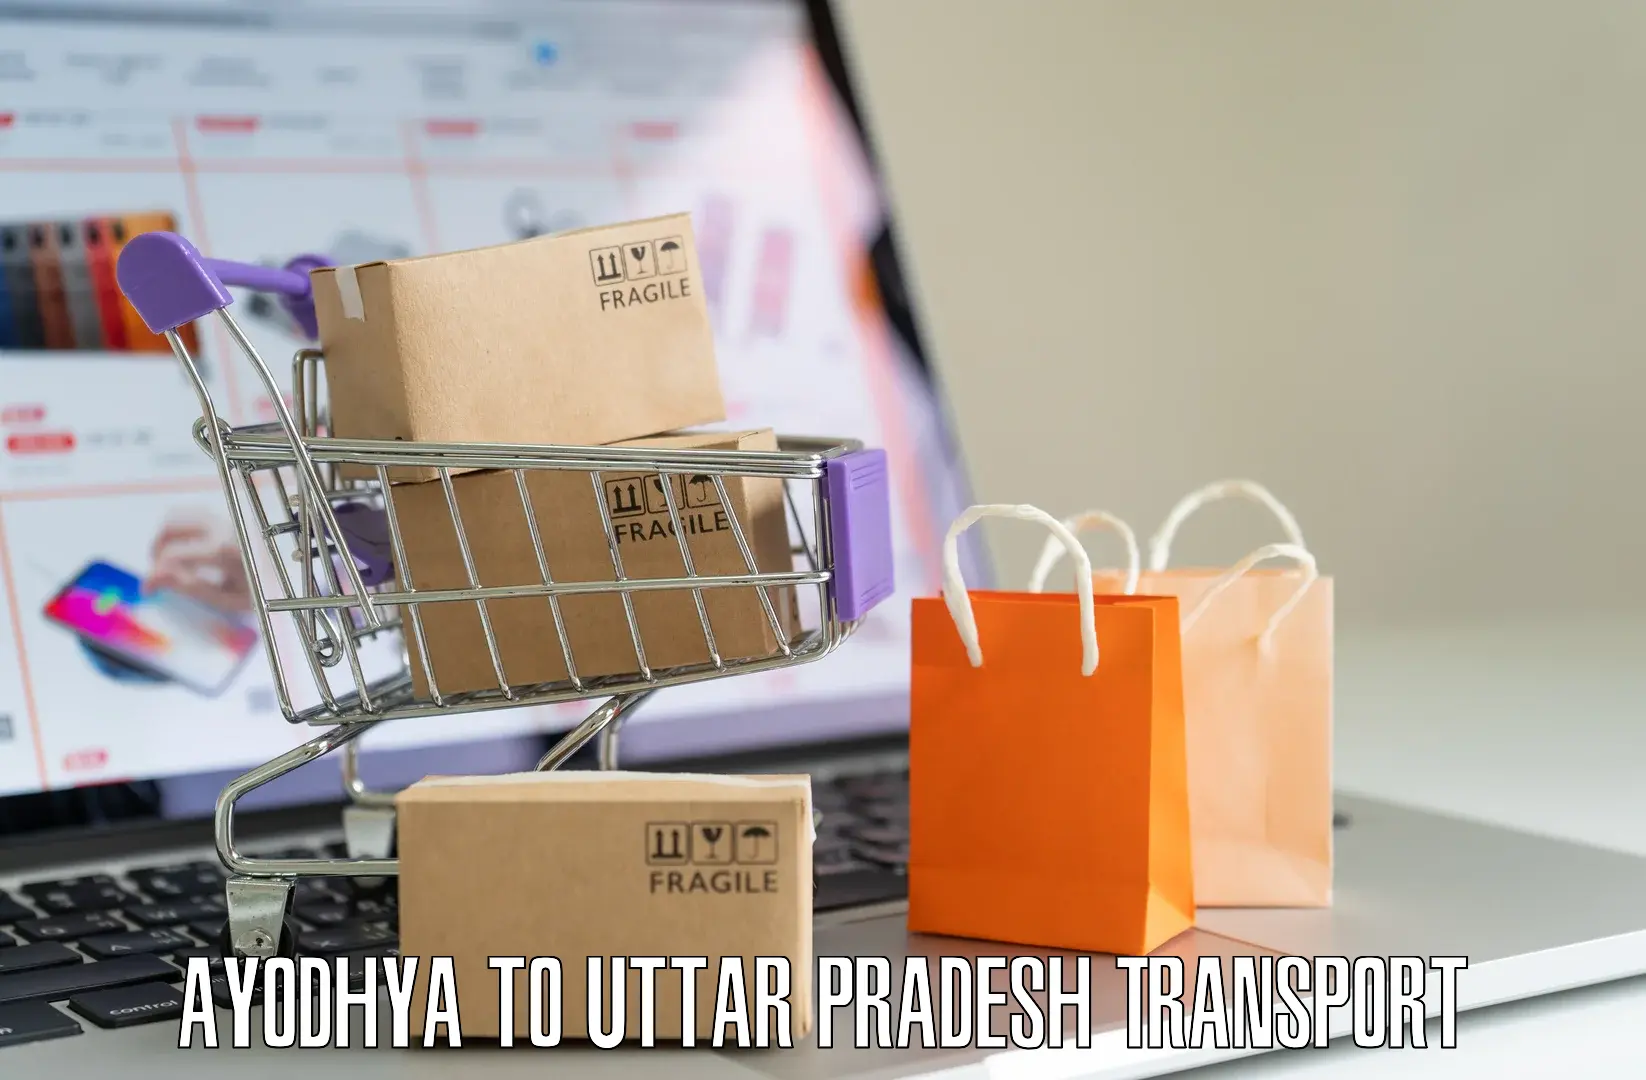 Express transport services in Ayodhya to Aligarh